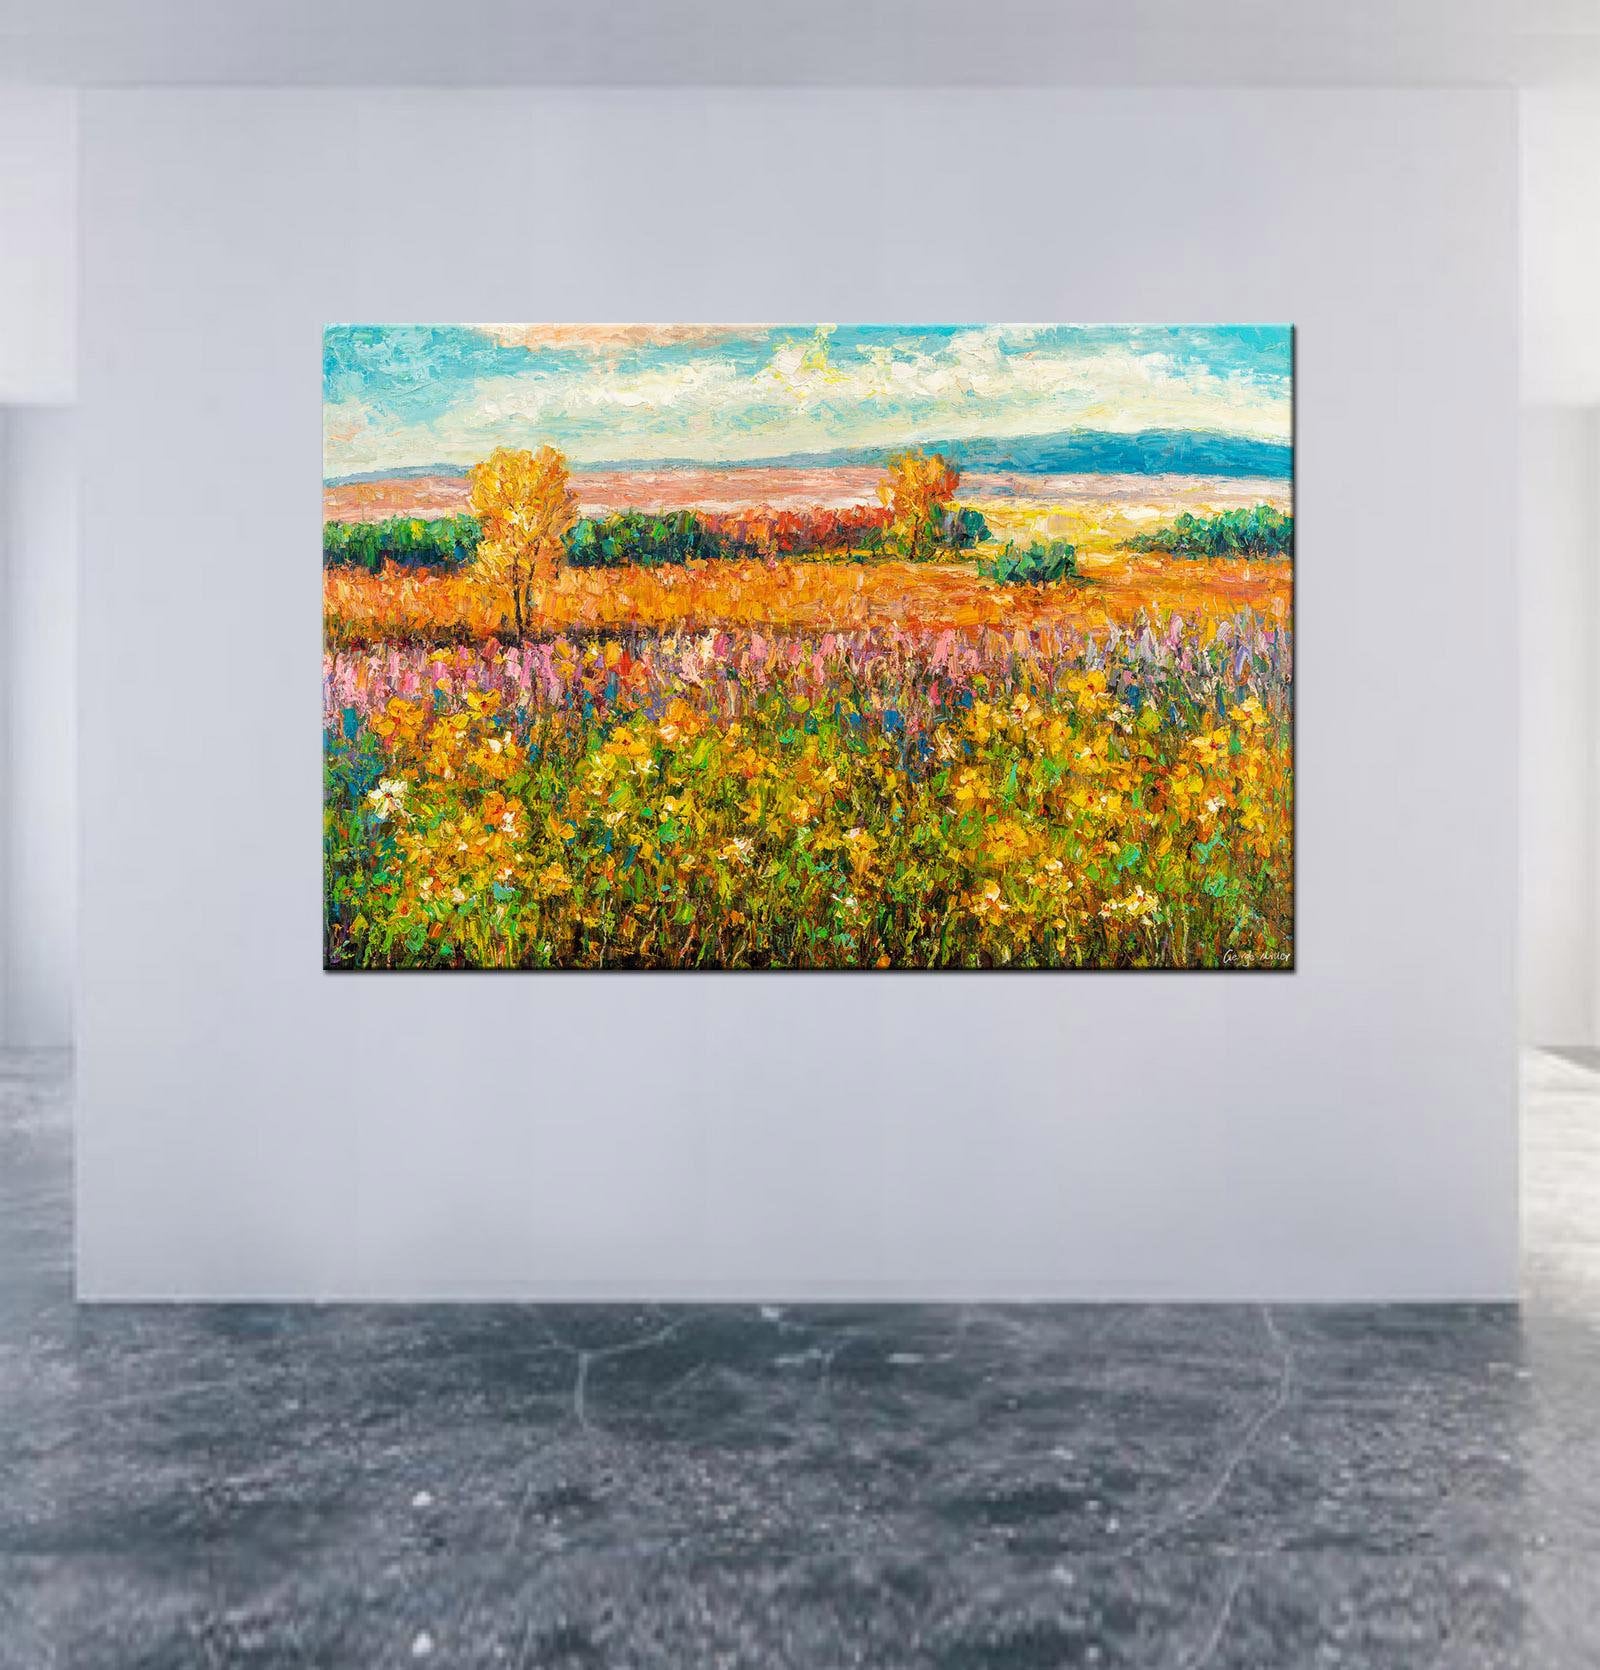 Large Original Oil Painting, Modern Painting, Oil Painting Landscape, Canvas Wall Decor, Canvas Art, Large Art, Kitchen Decor, Abstract Art